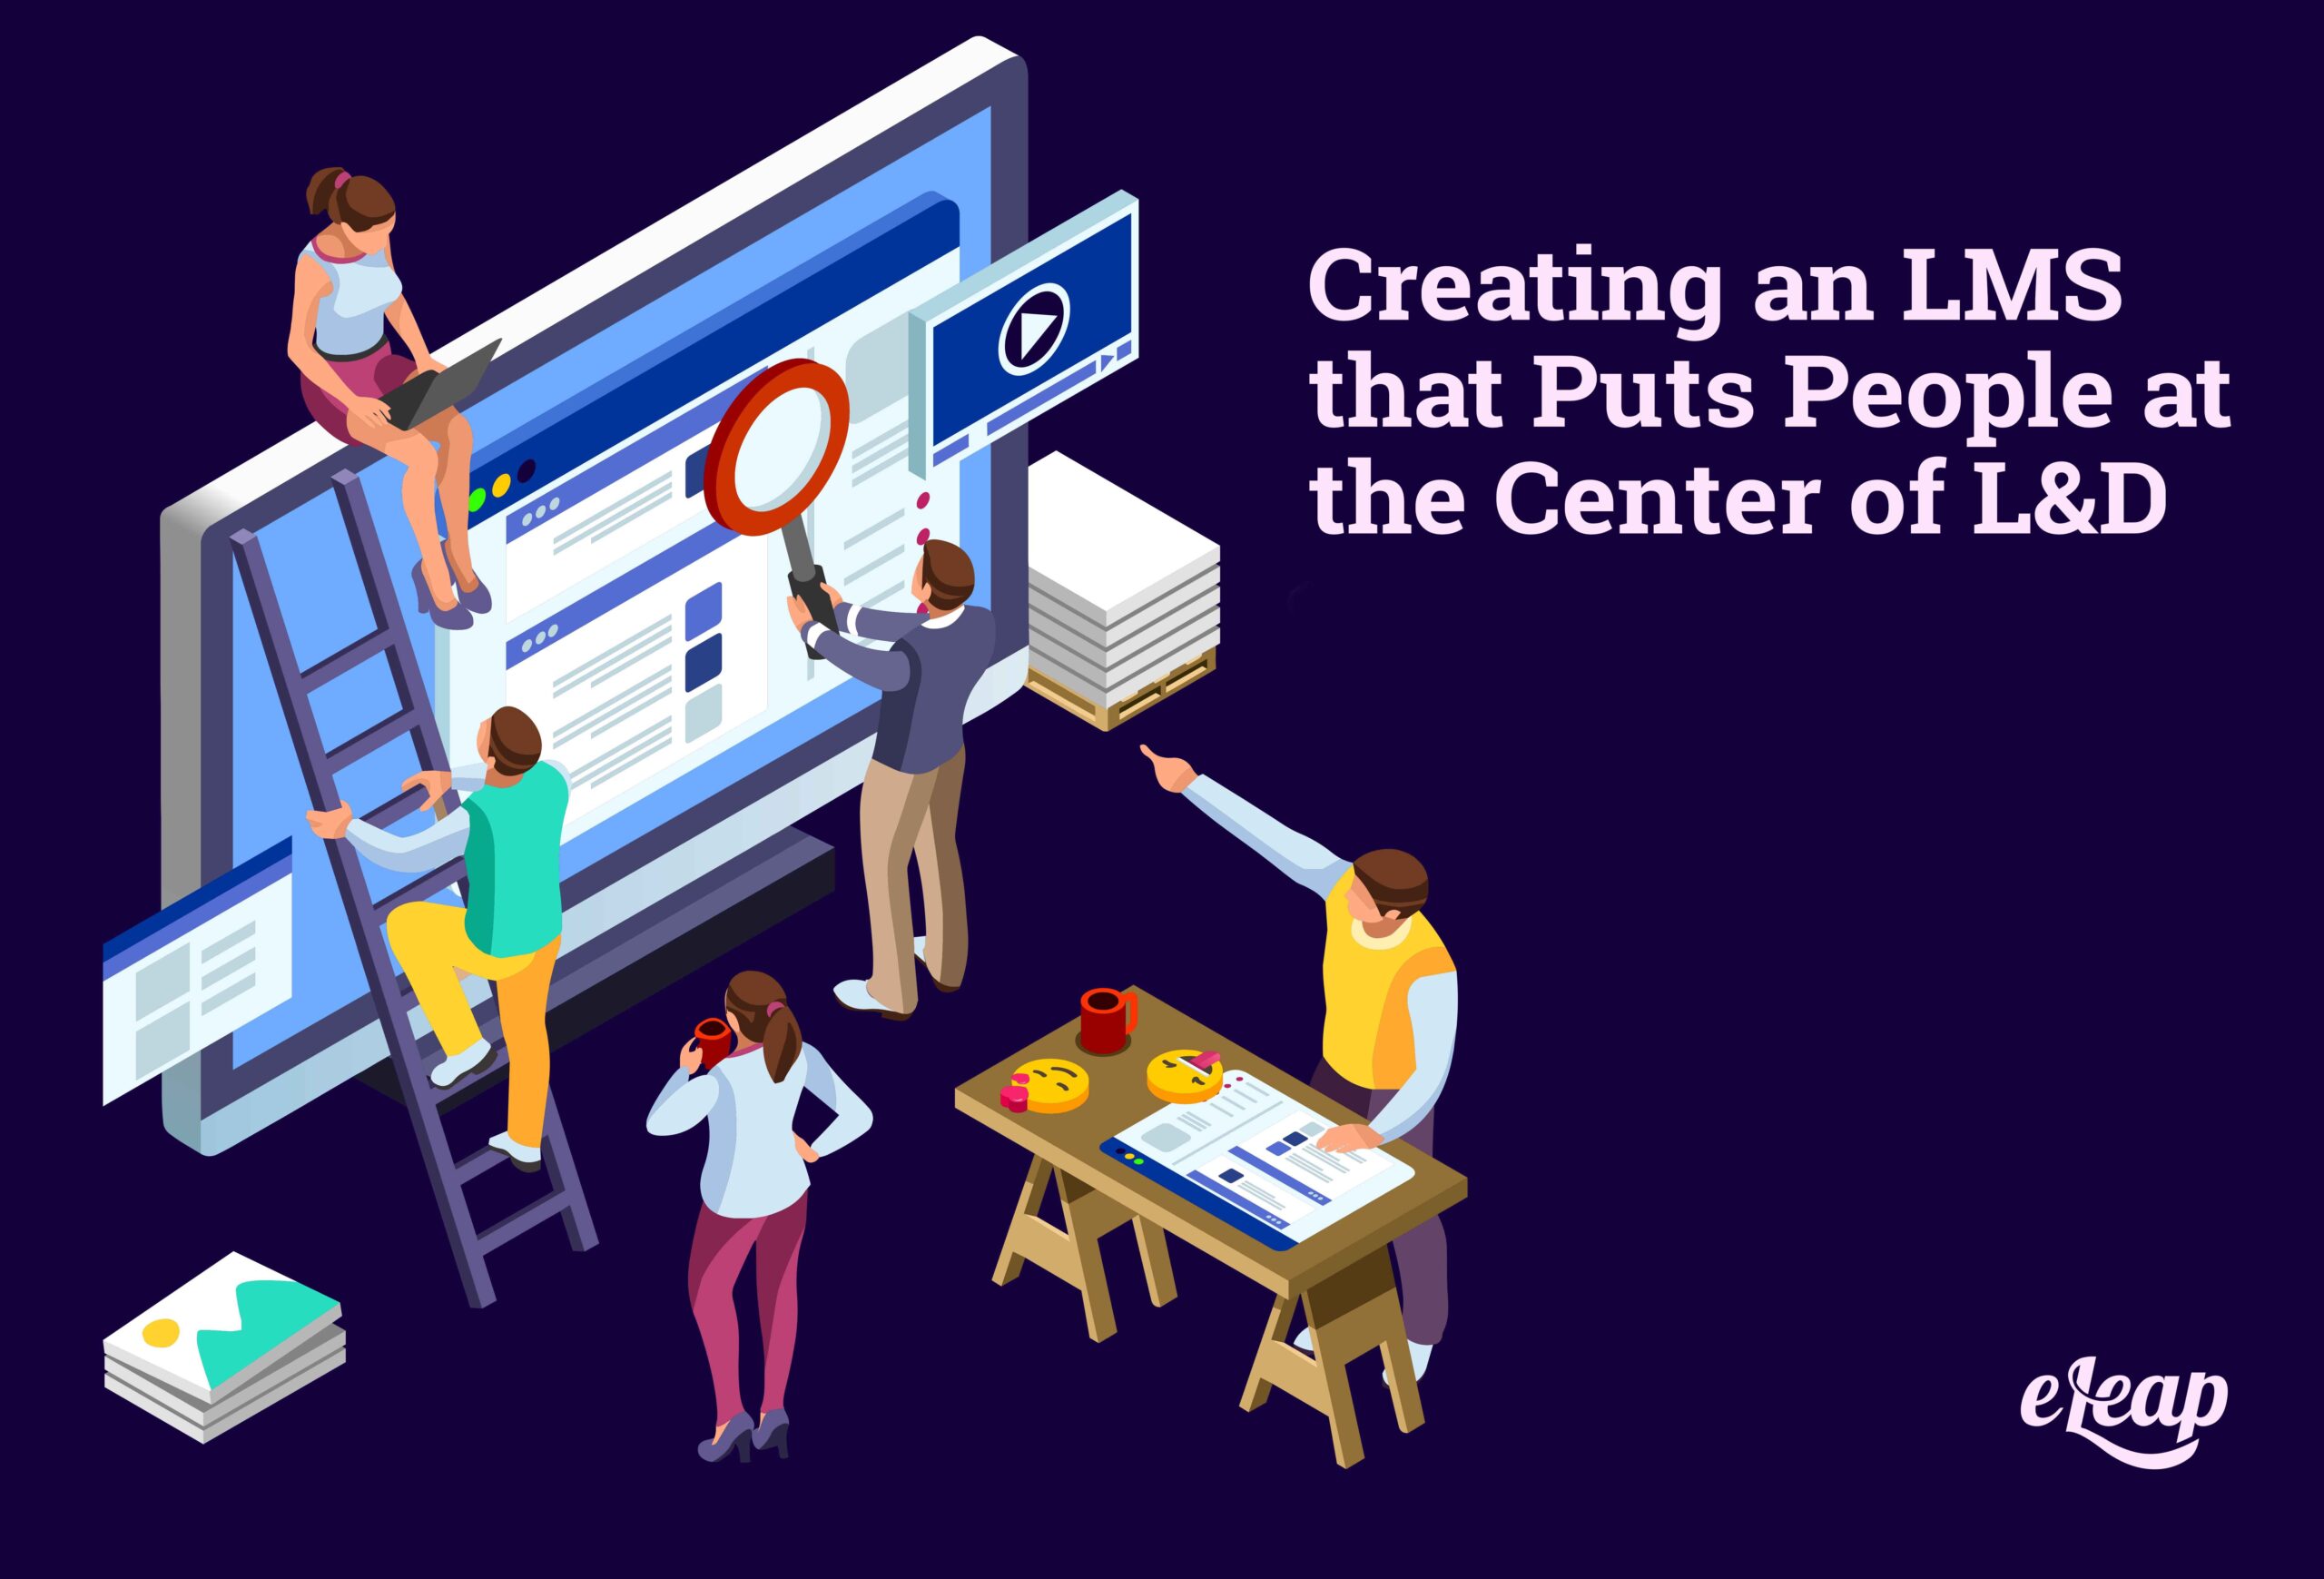 Creating an LMS that Puts People at the Center of L&D